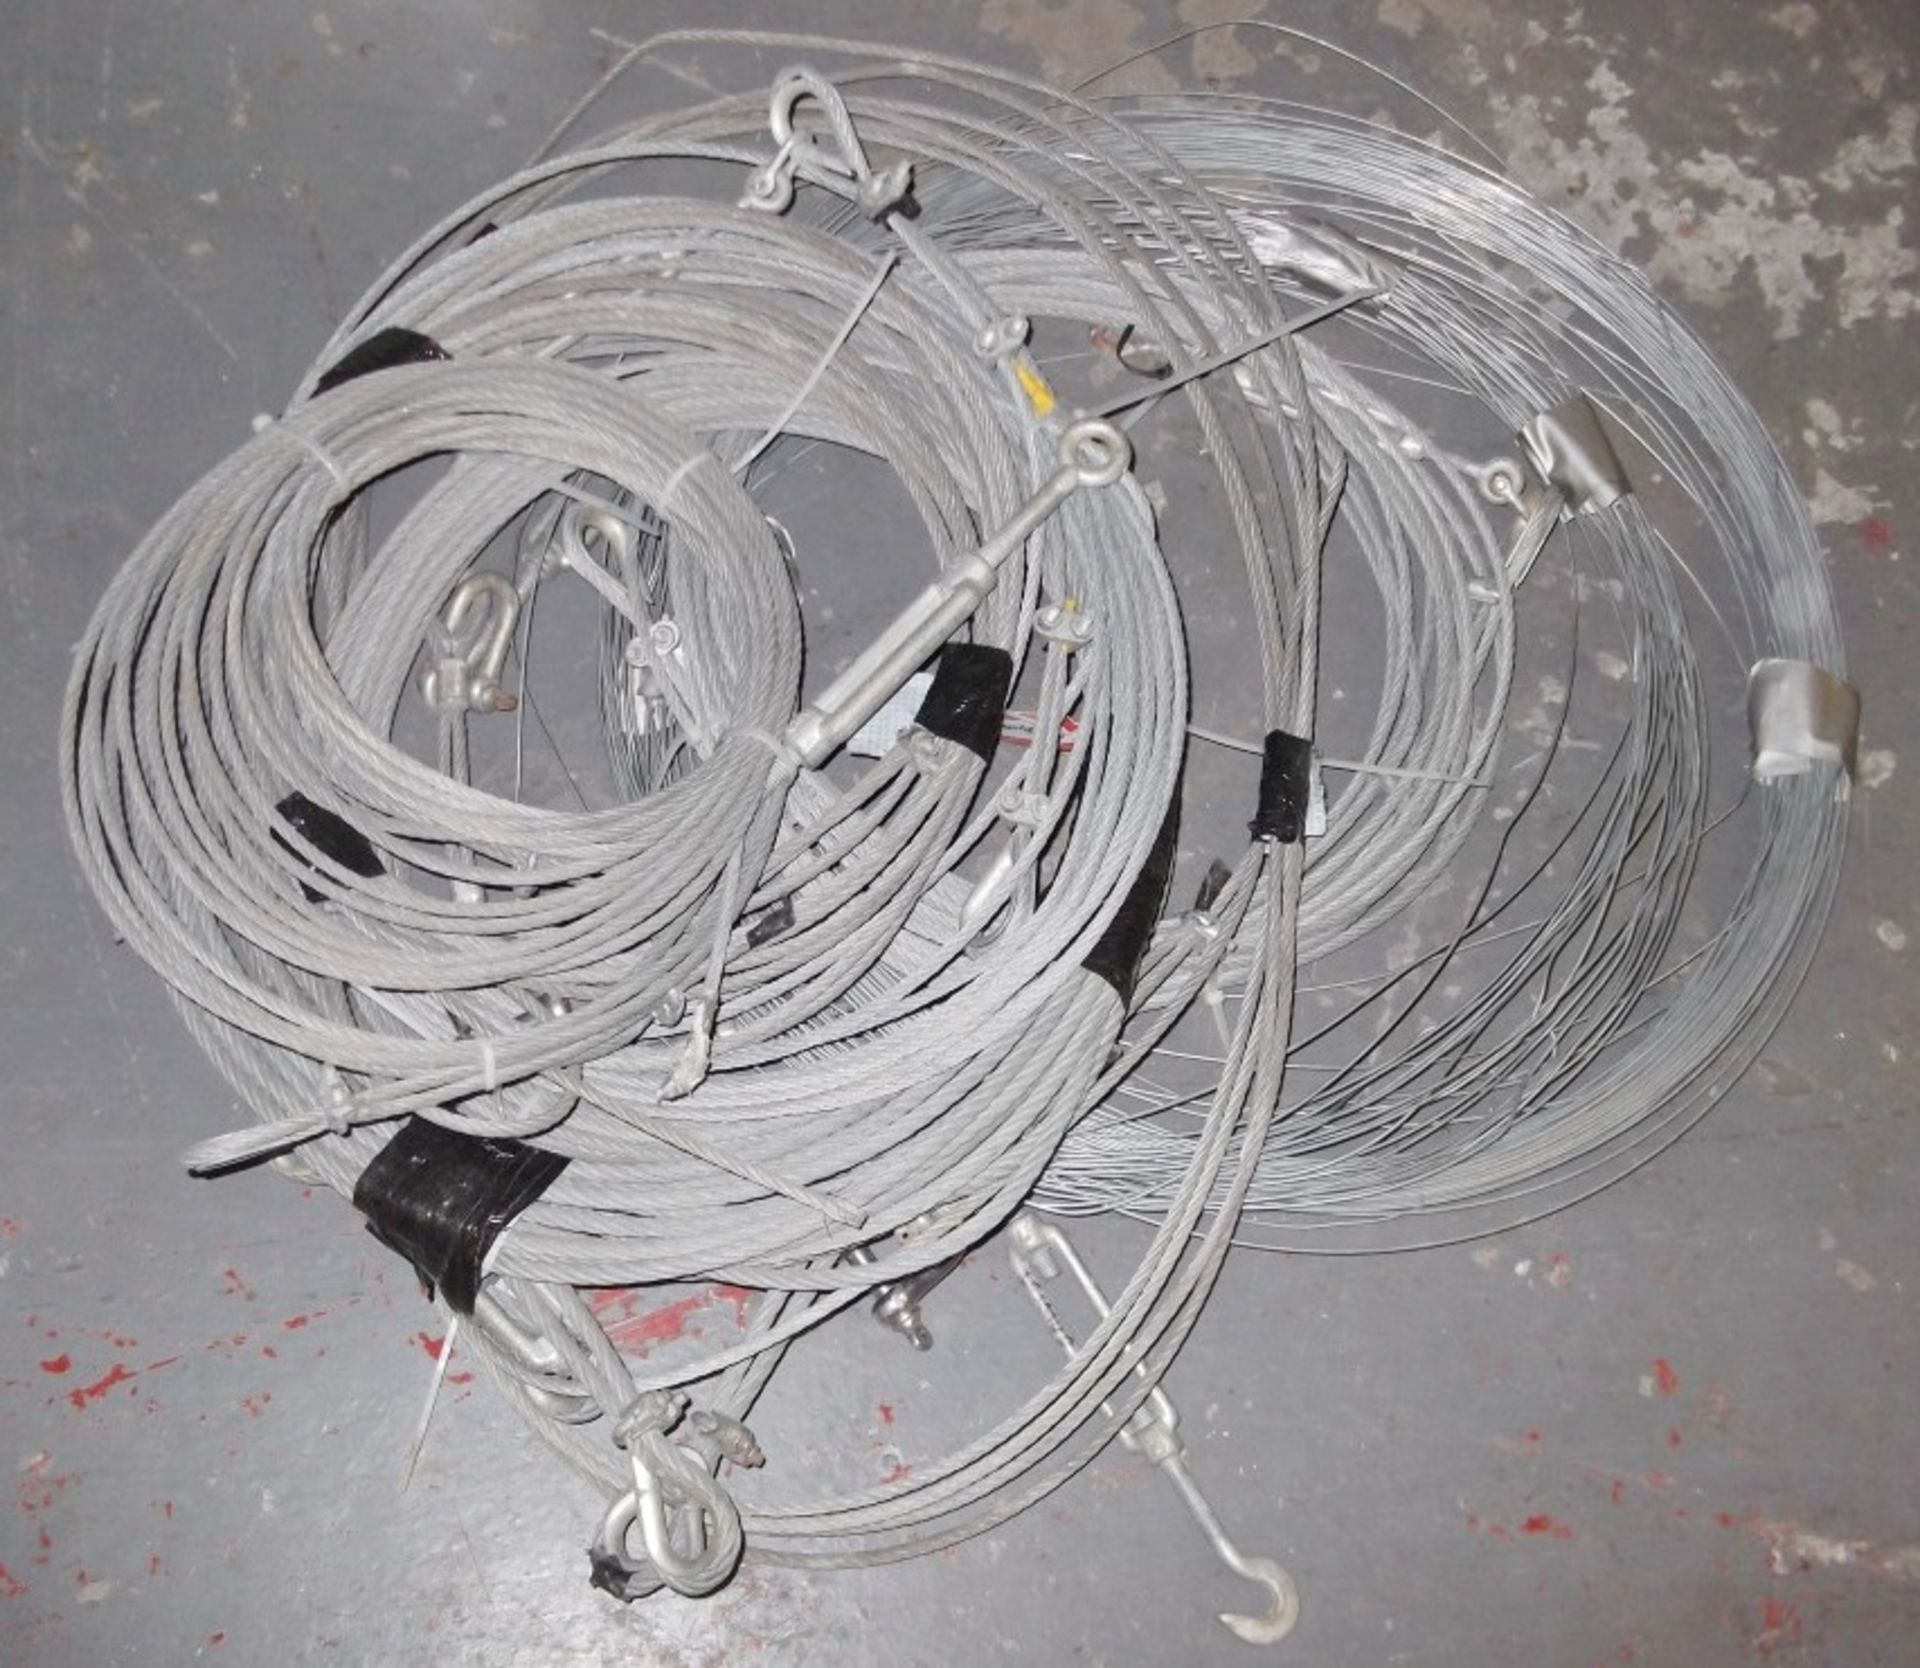 9 x Assorted Coils Of Catenary Wire - Supplied In A Variety Of Thicknesses And Lengths, Most With